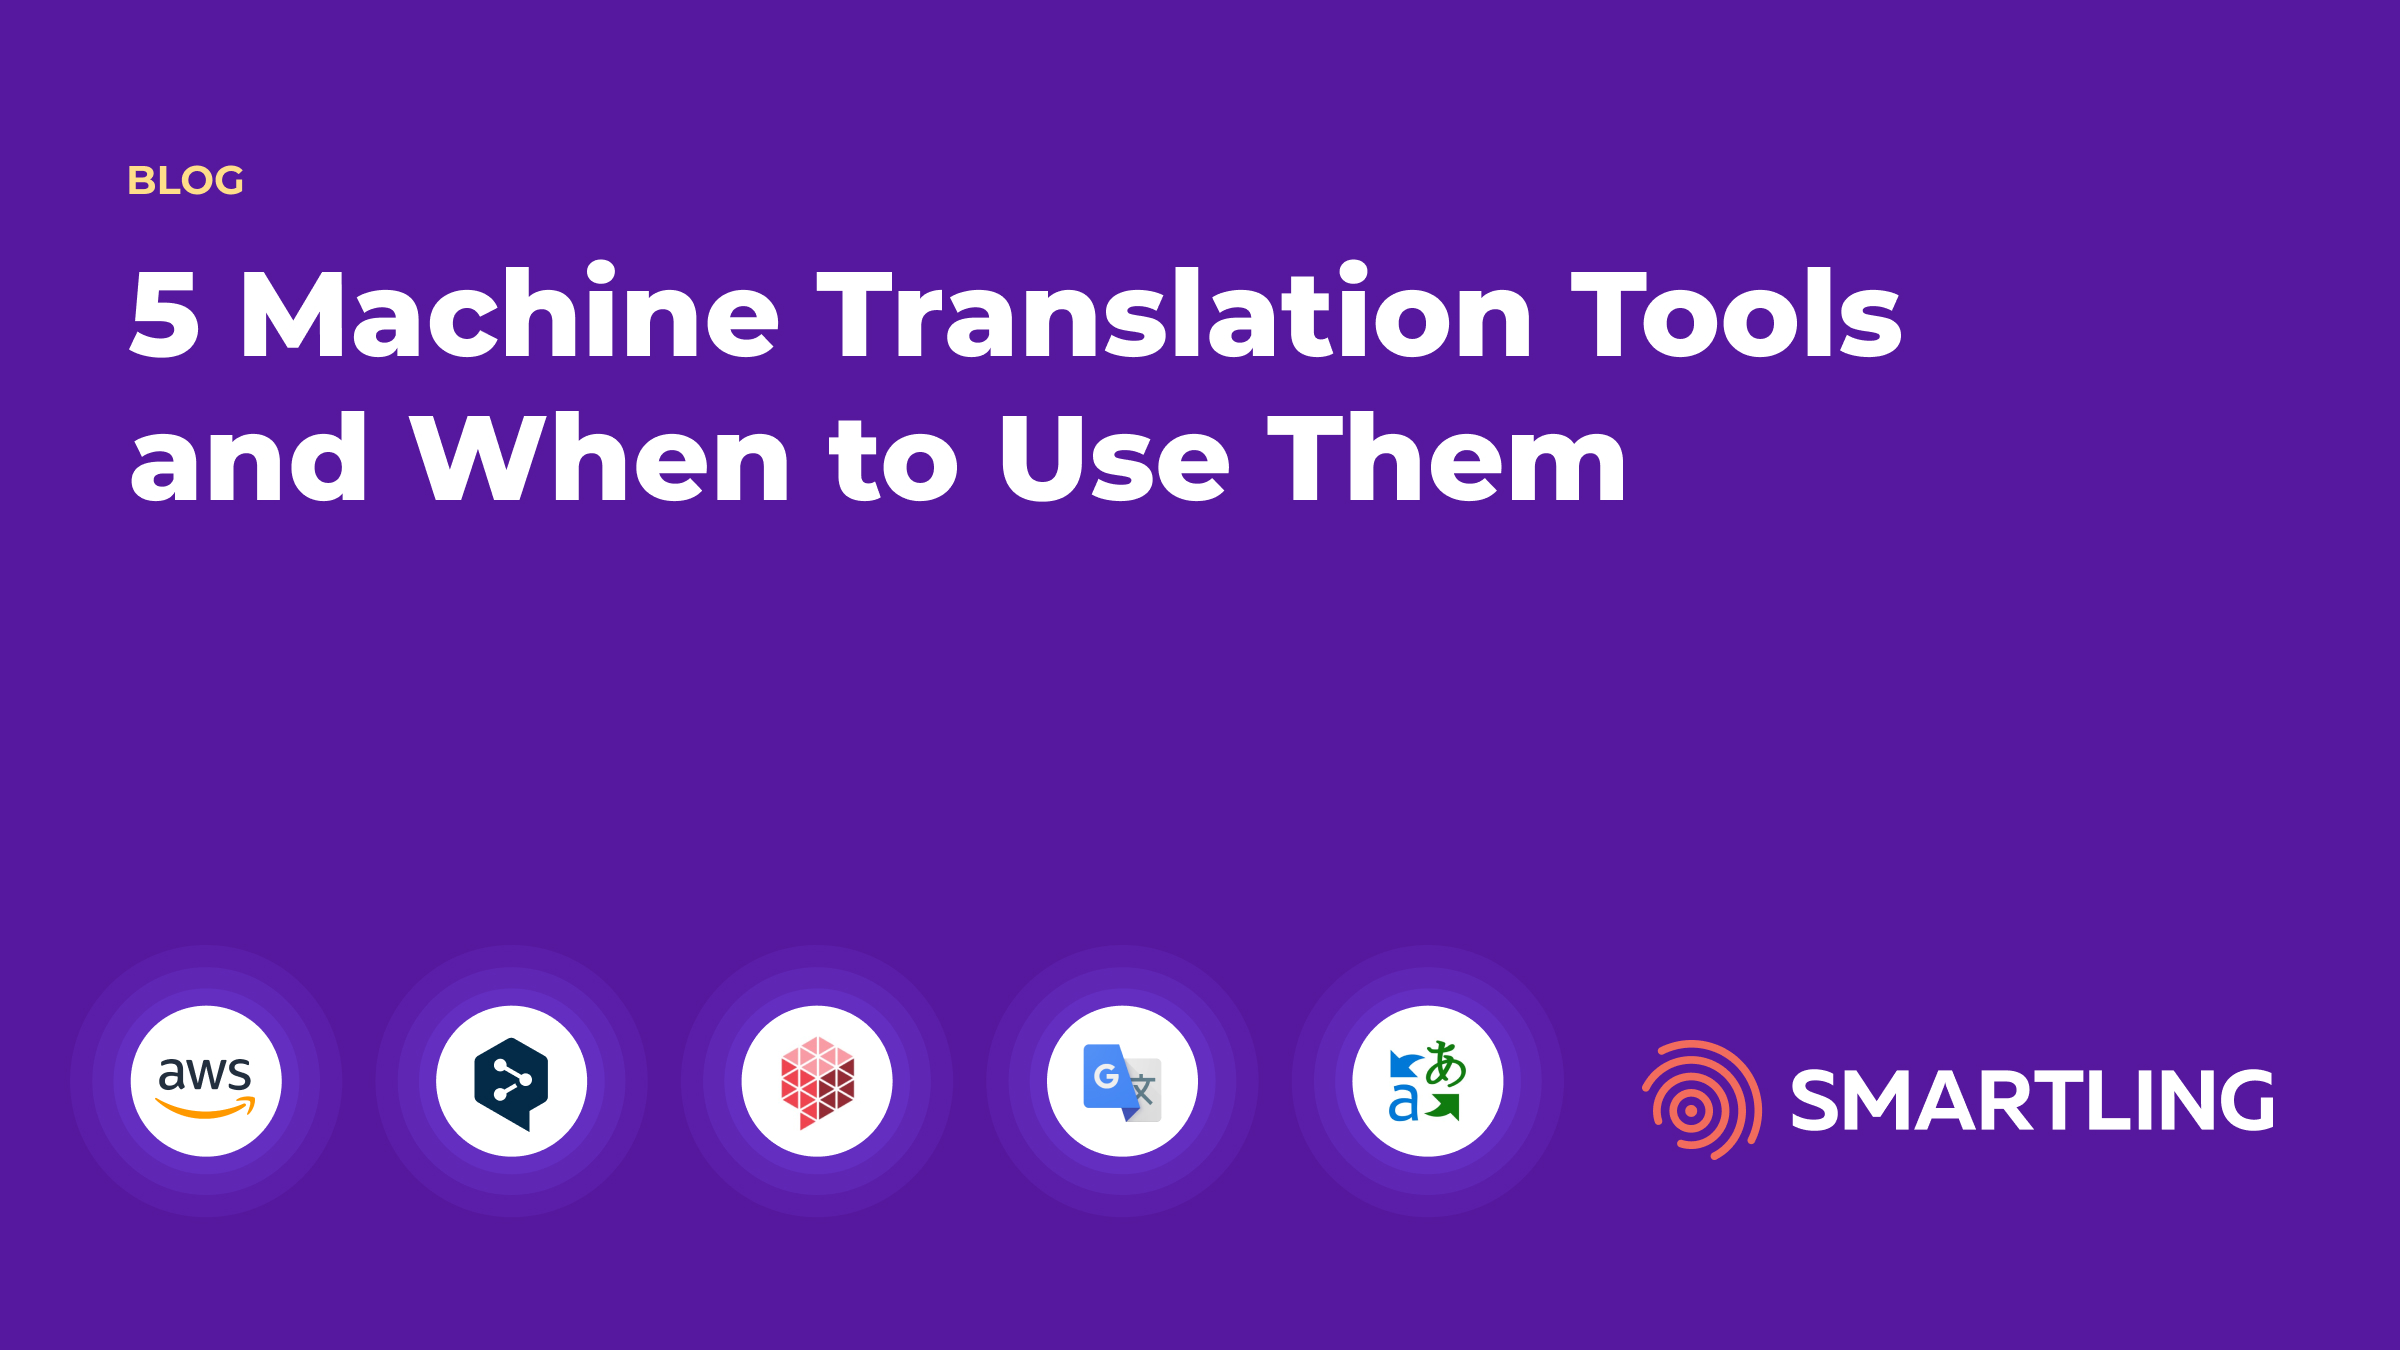 4Q221018 - 5 Machine Translation Tools and When to Use Them - 1200x675 - 2